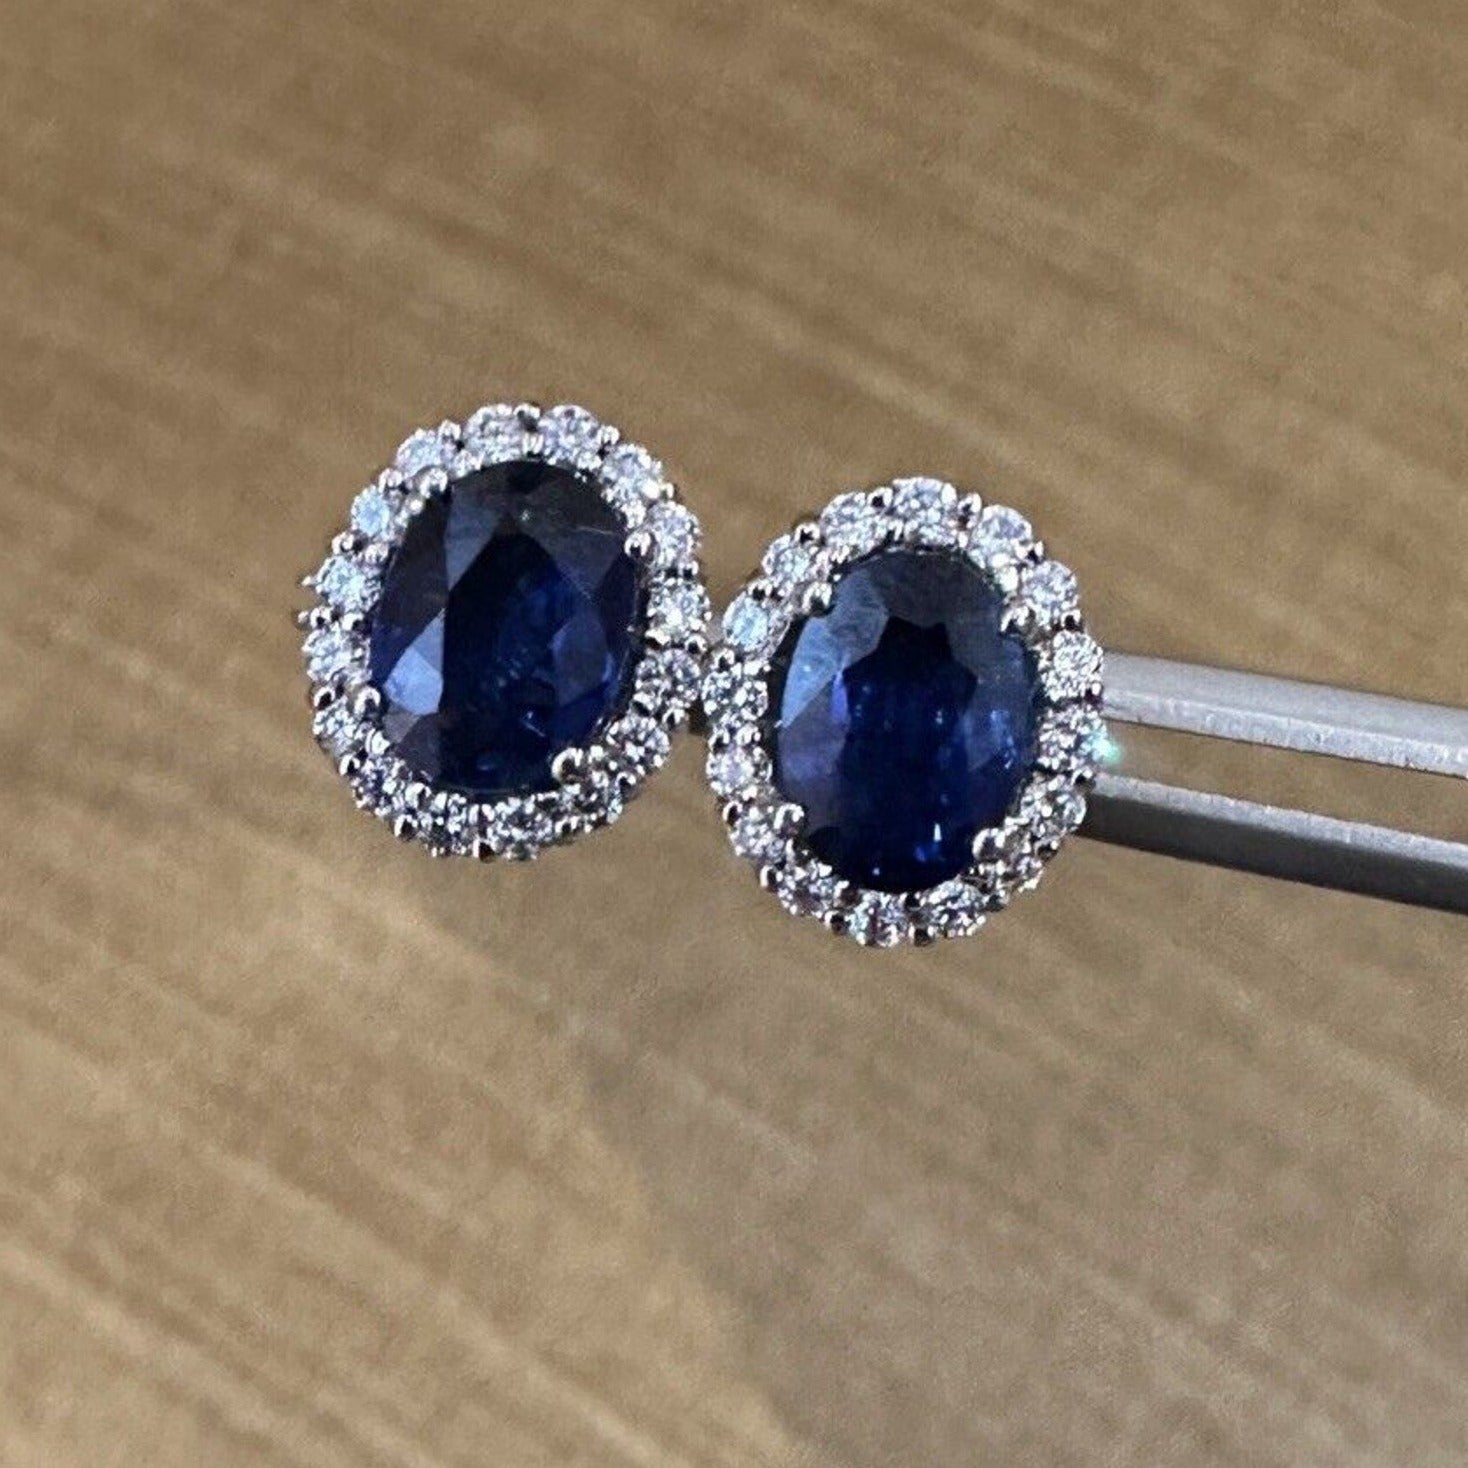 Oval Blue Sapphire and Diamond Halo Earrings in 14k White Gold